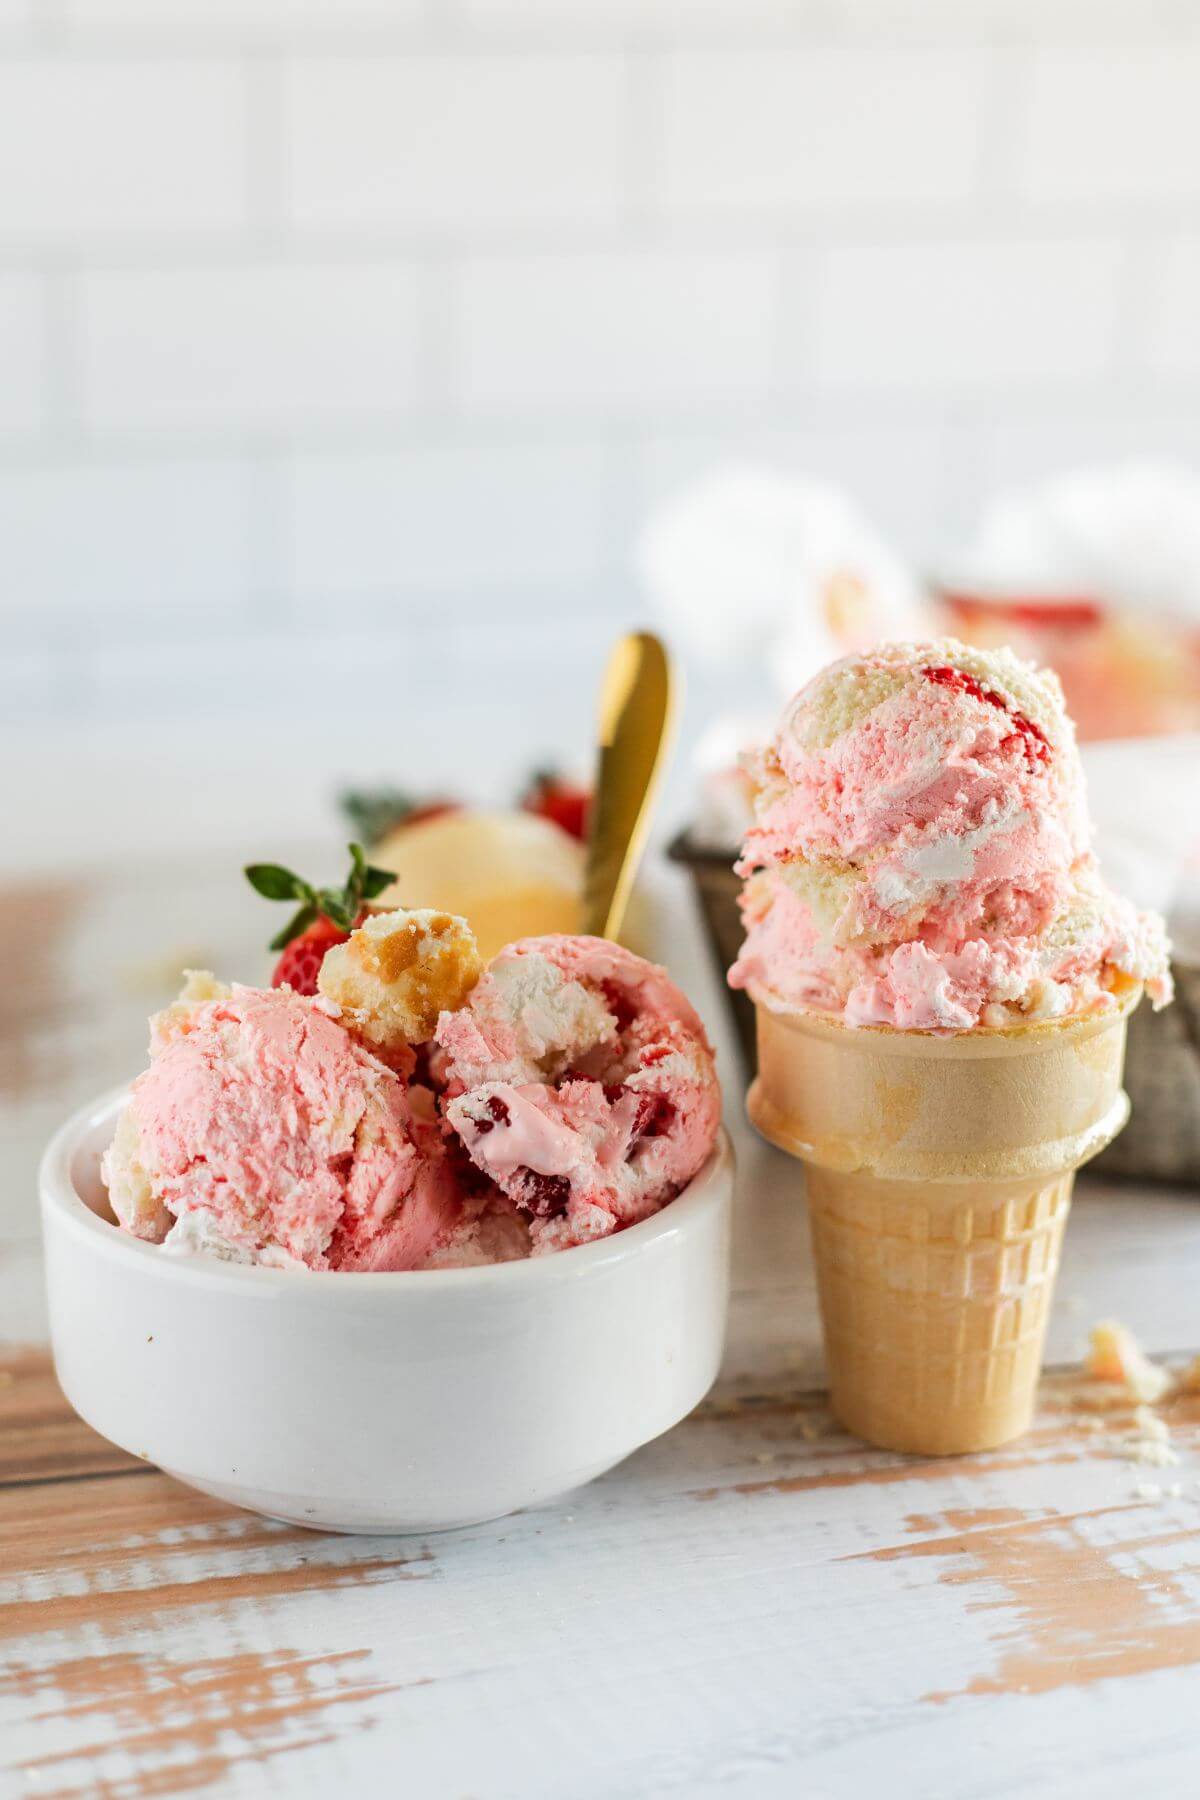 A full ice cream cone sits next to a full bowl of homemade strawberry ice cream. 